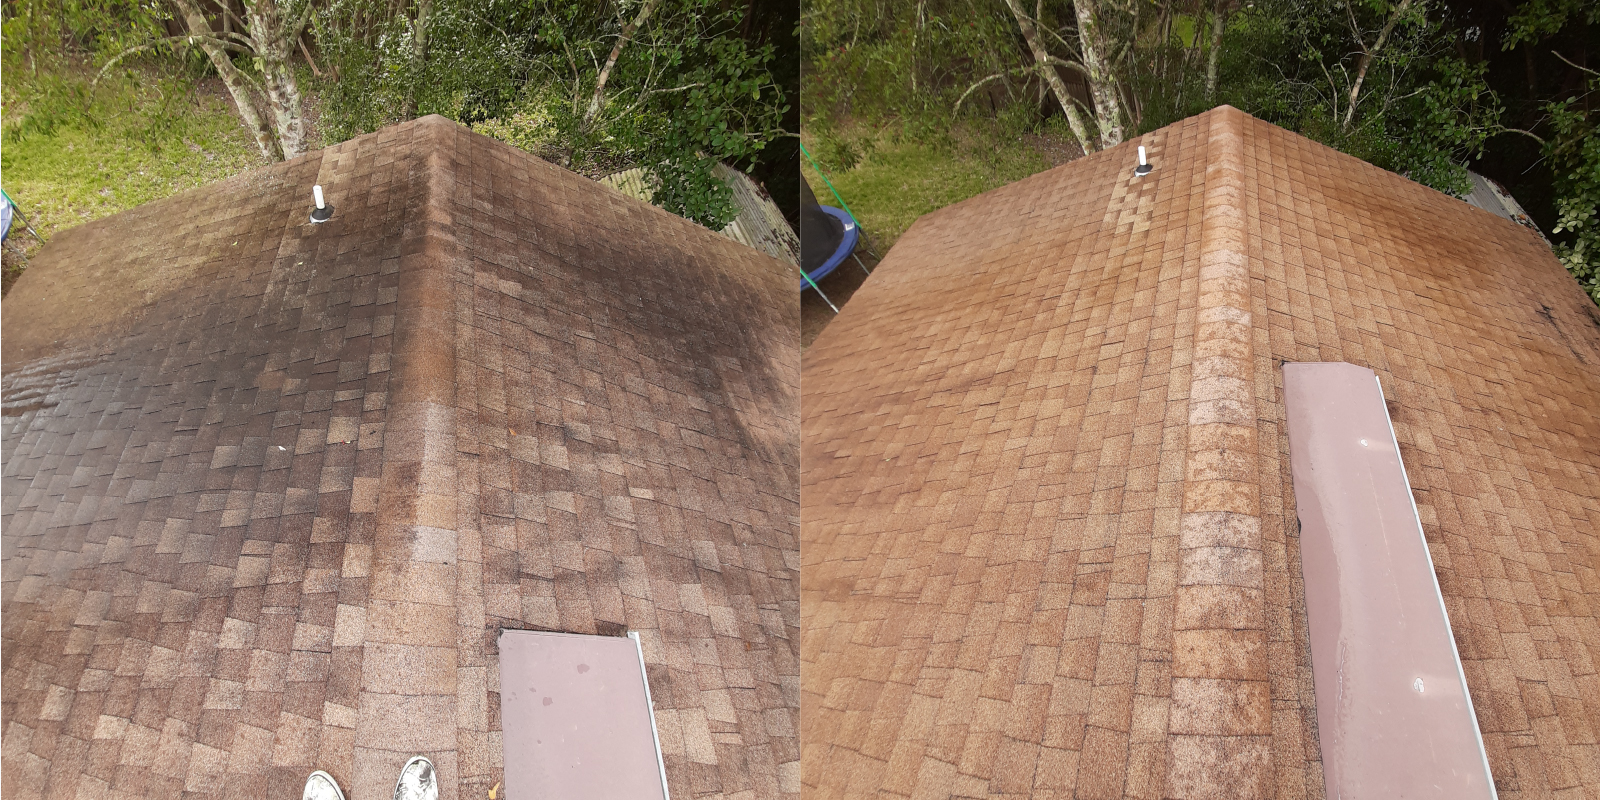 roof cleaning before and after